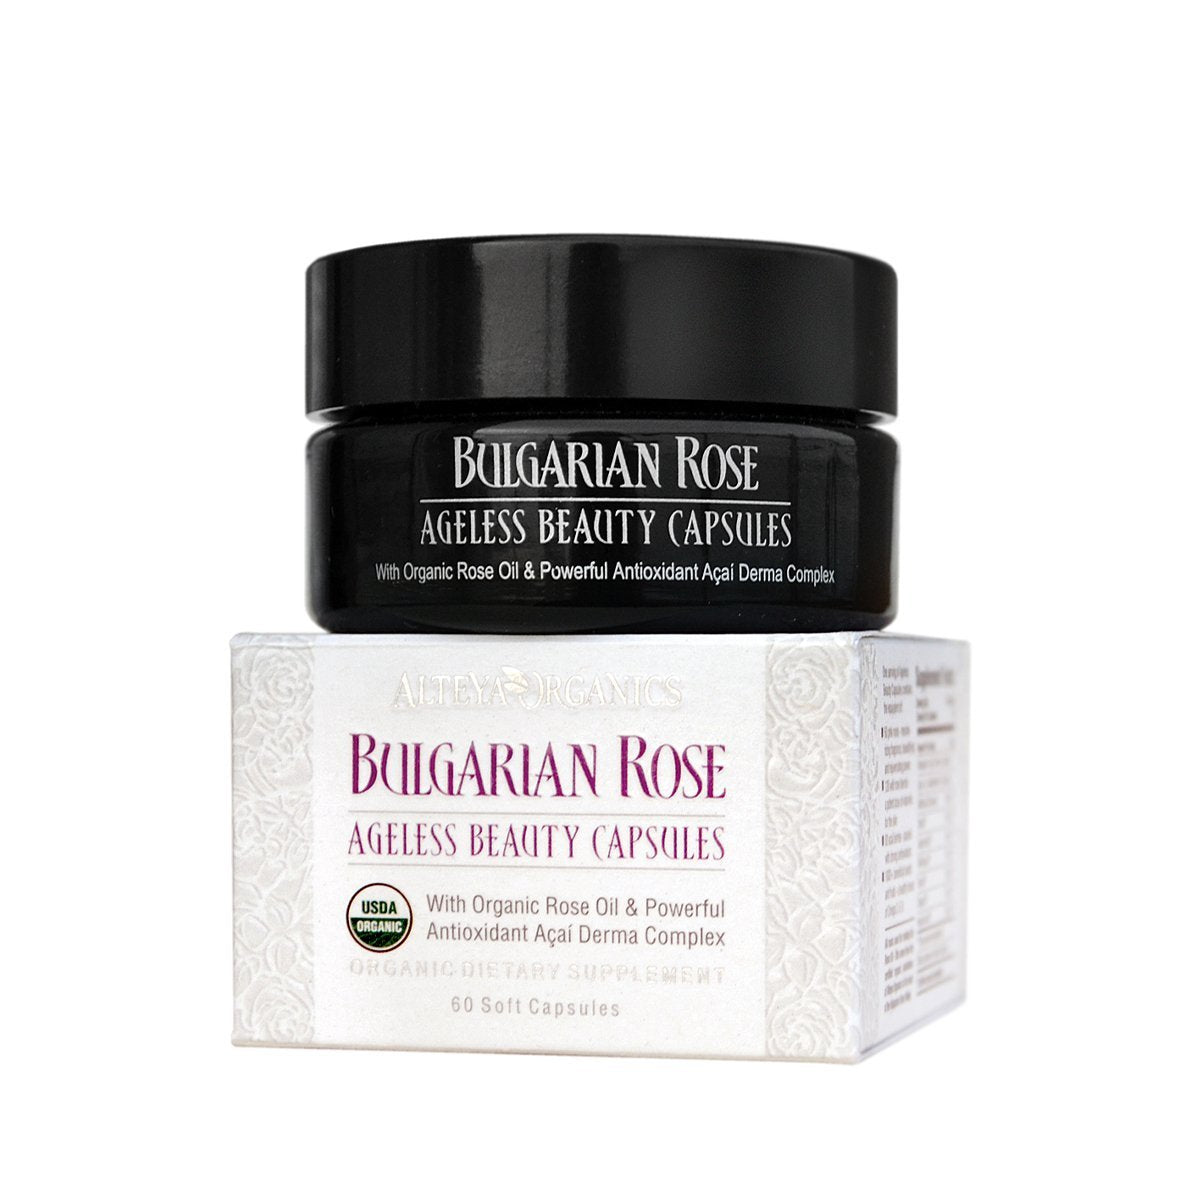 A jar of antioxidant-rich Ageless Beauty Capsules Bulgarian Rose, infused with the rejuvenating power of Organic Rose Oil. These capsules are specially formulated with the potent Derma Complex to combat wrinkles and promote